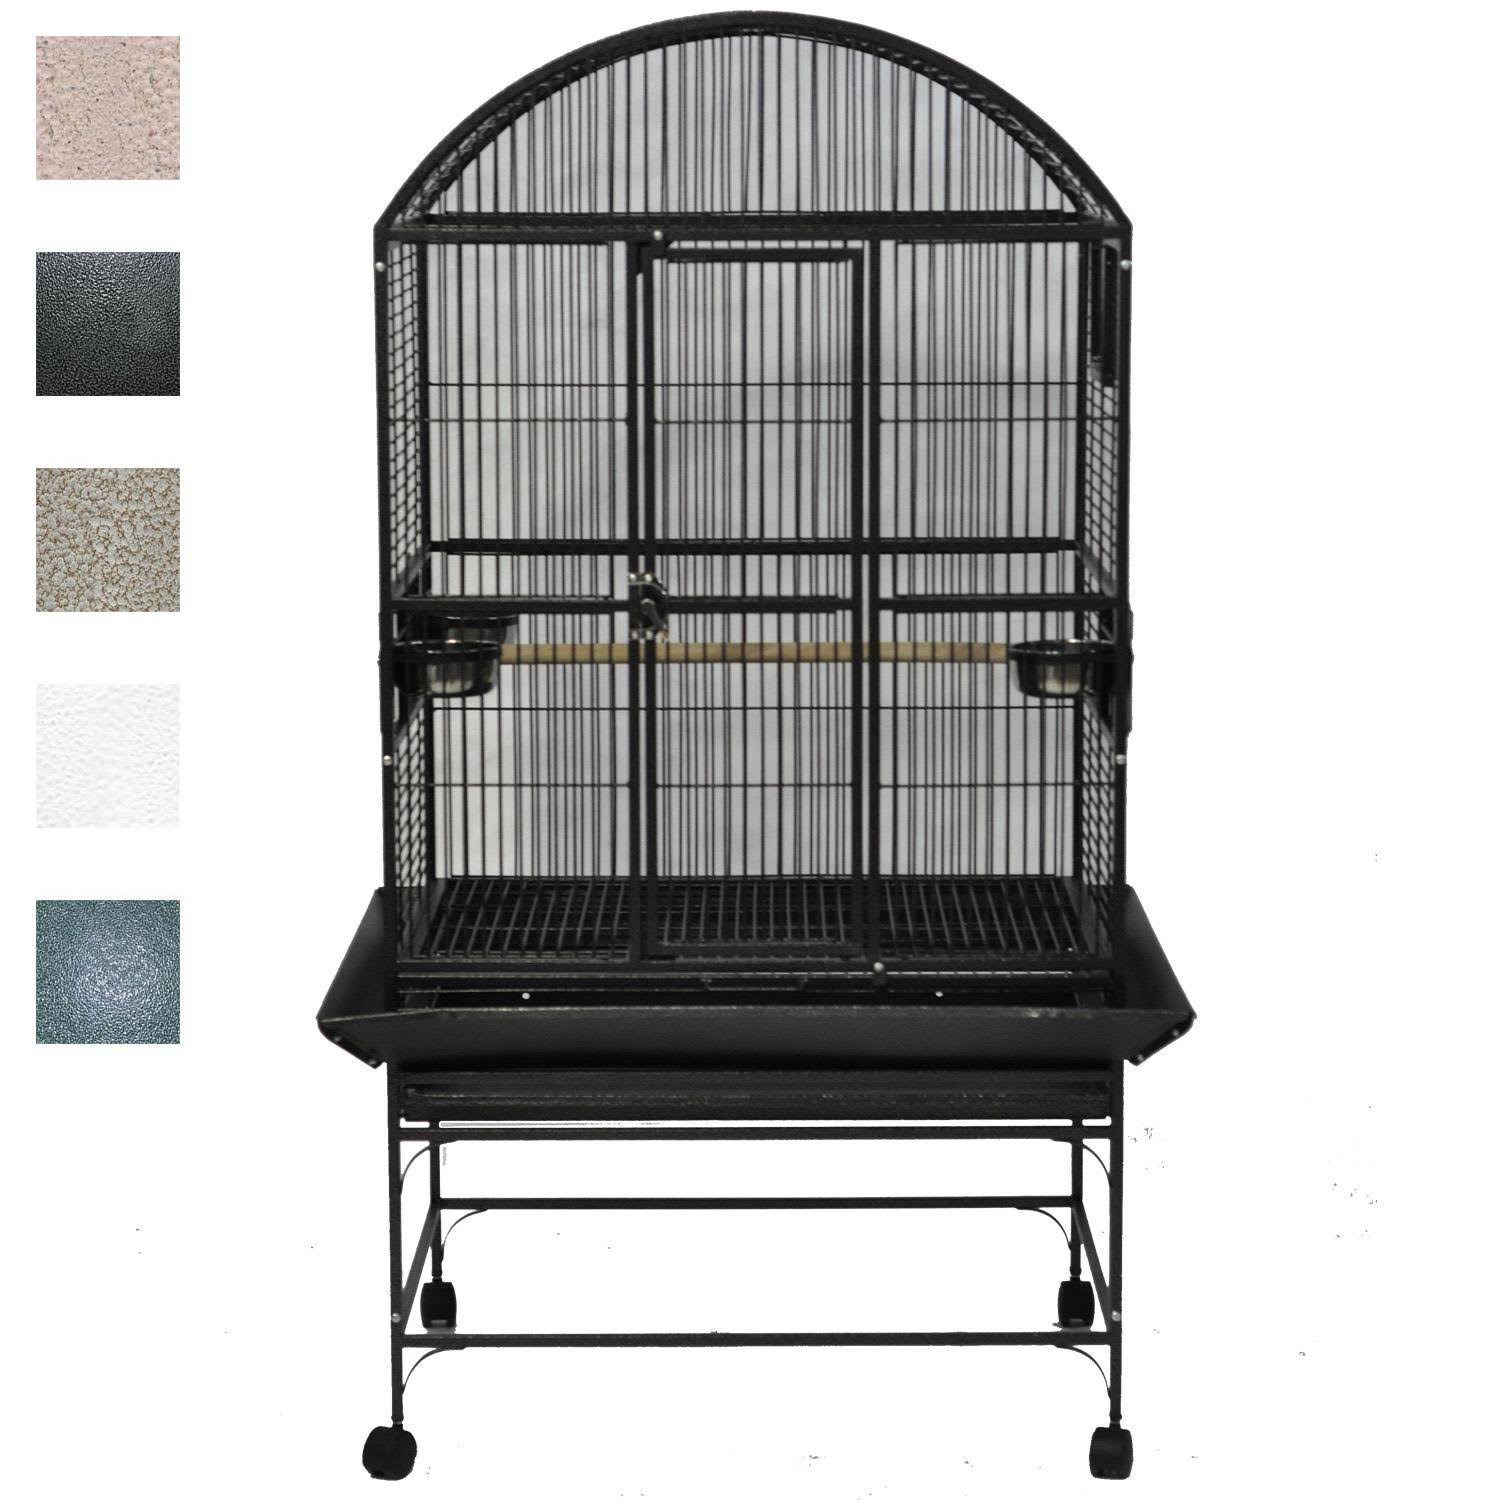 A and E Cage Company Platinum Palace Dometop Bird Cage - 32" x 23" x 63"